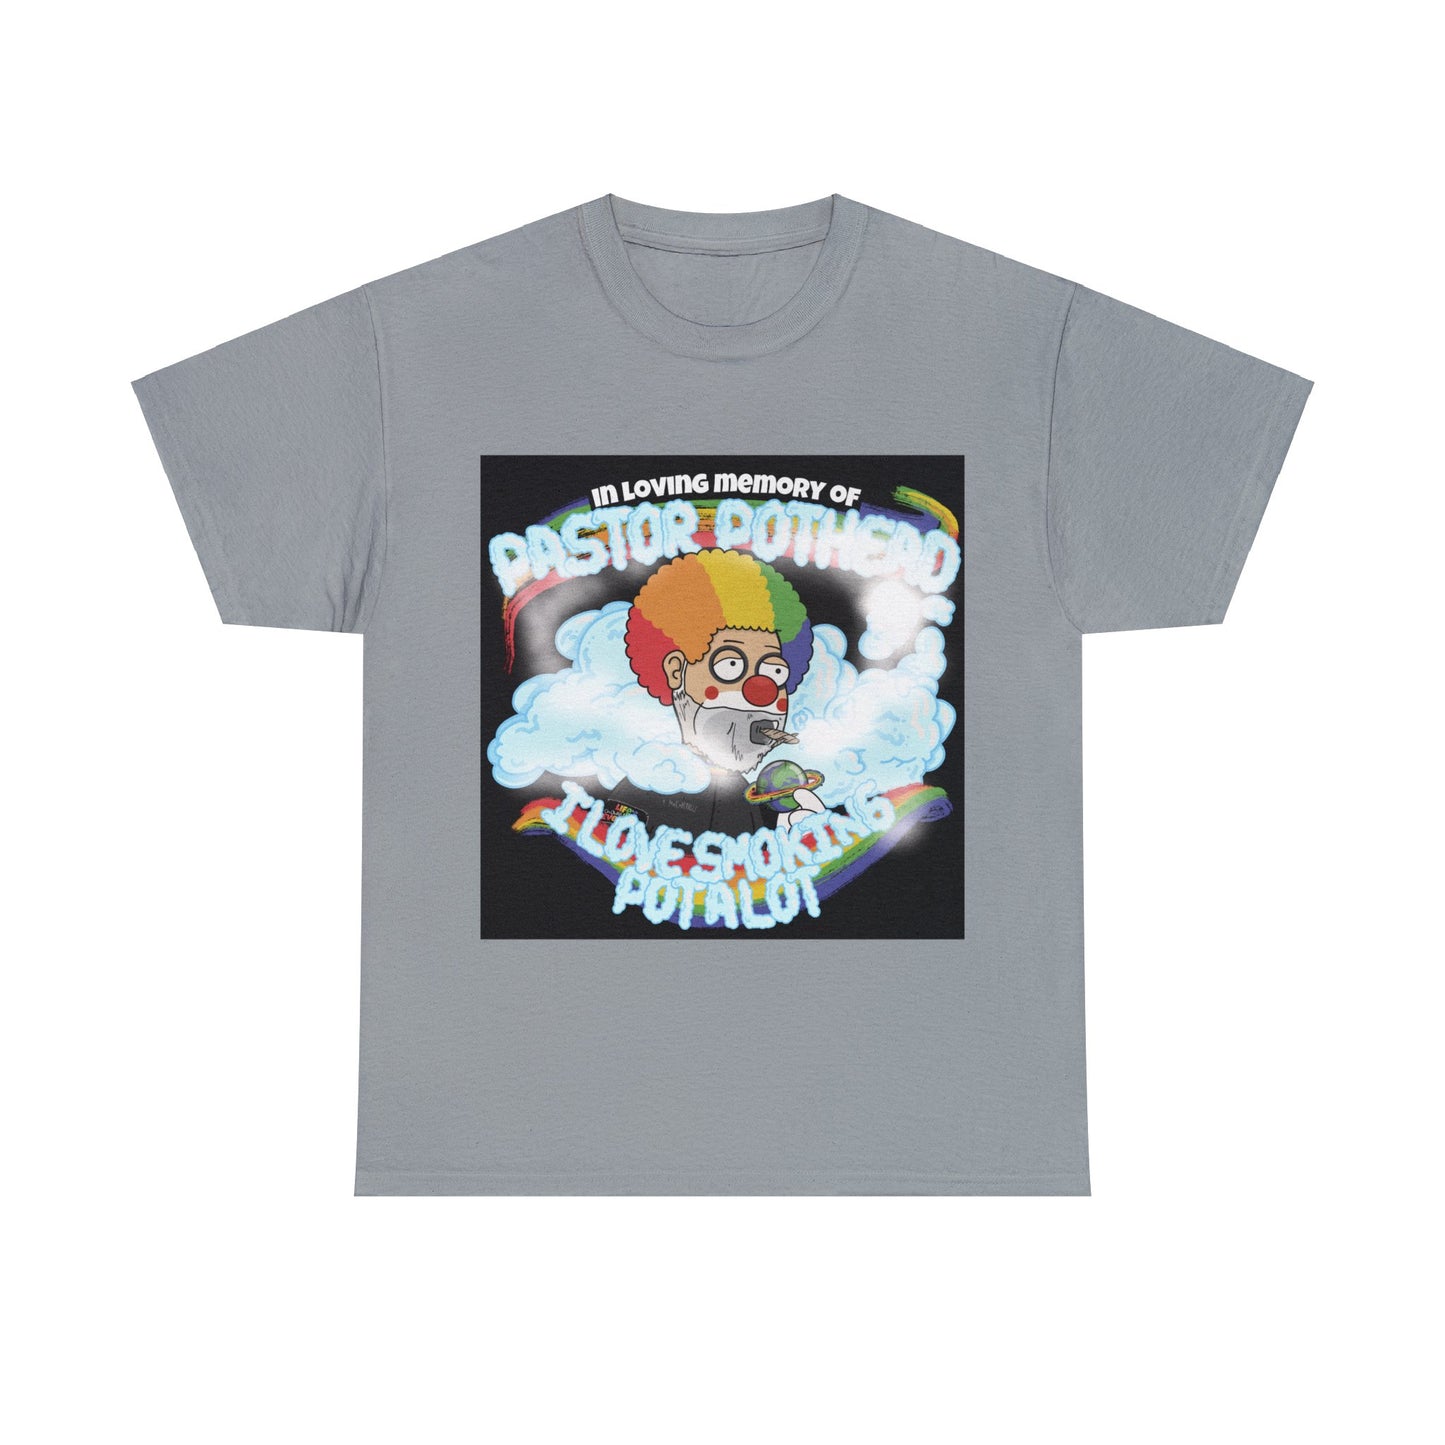 In Loving Memory of Pastor Pothead (more colors), Unisex Heavy Cotton Tee